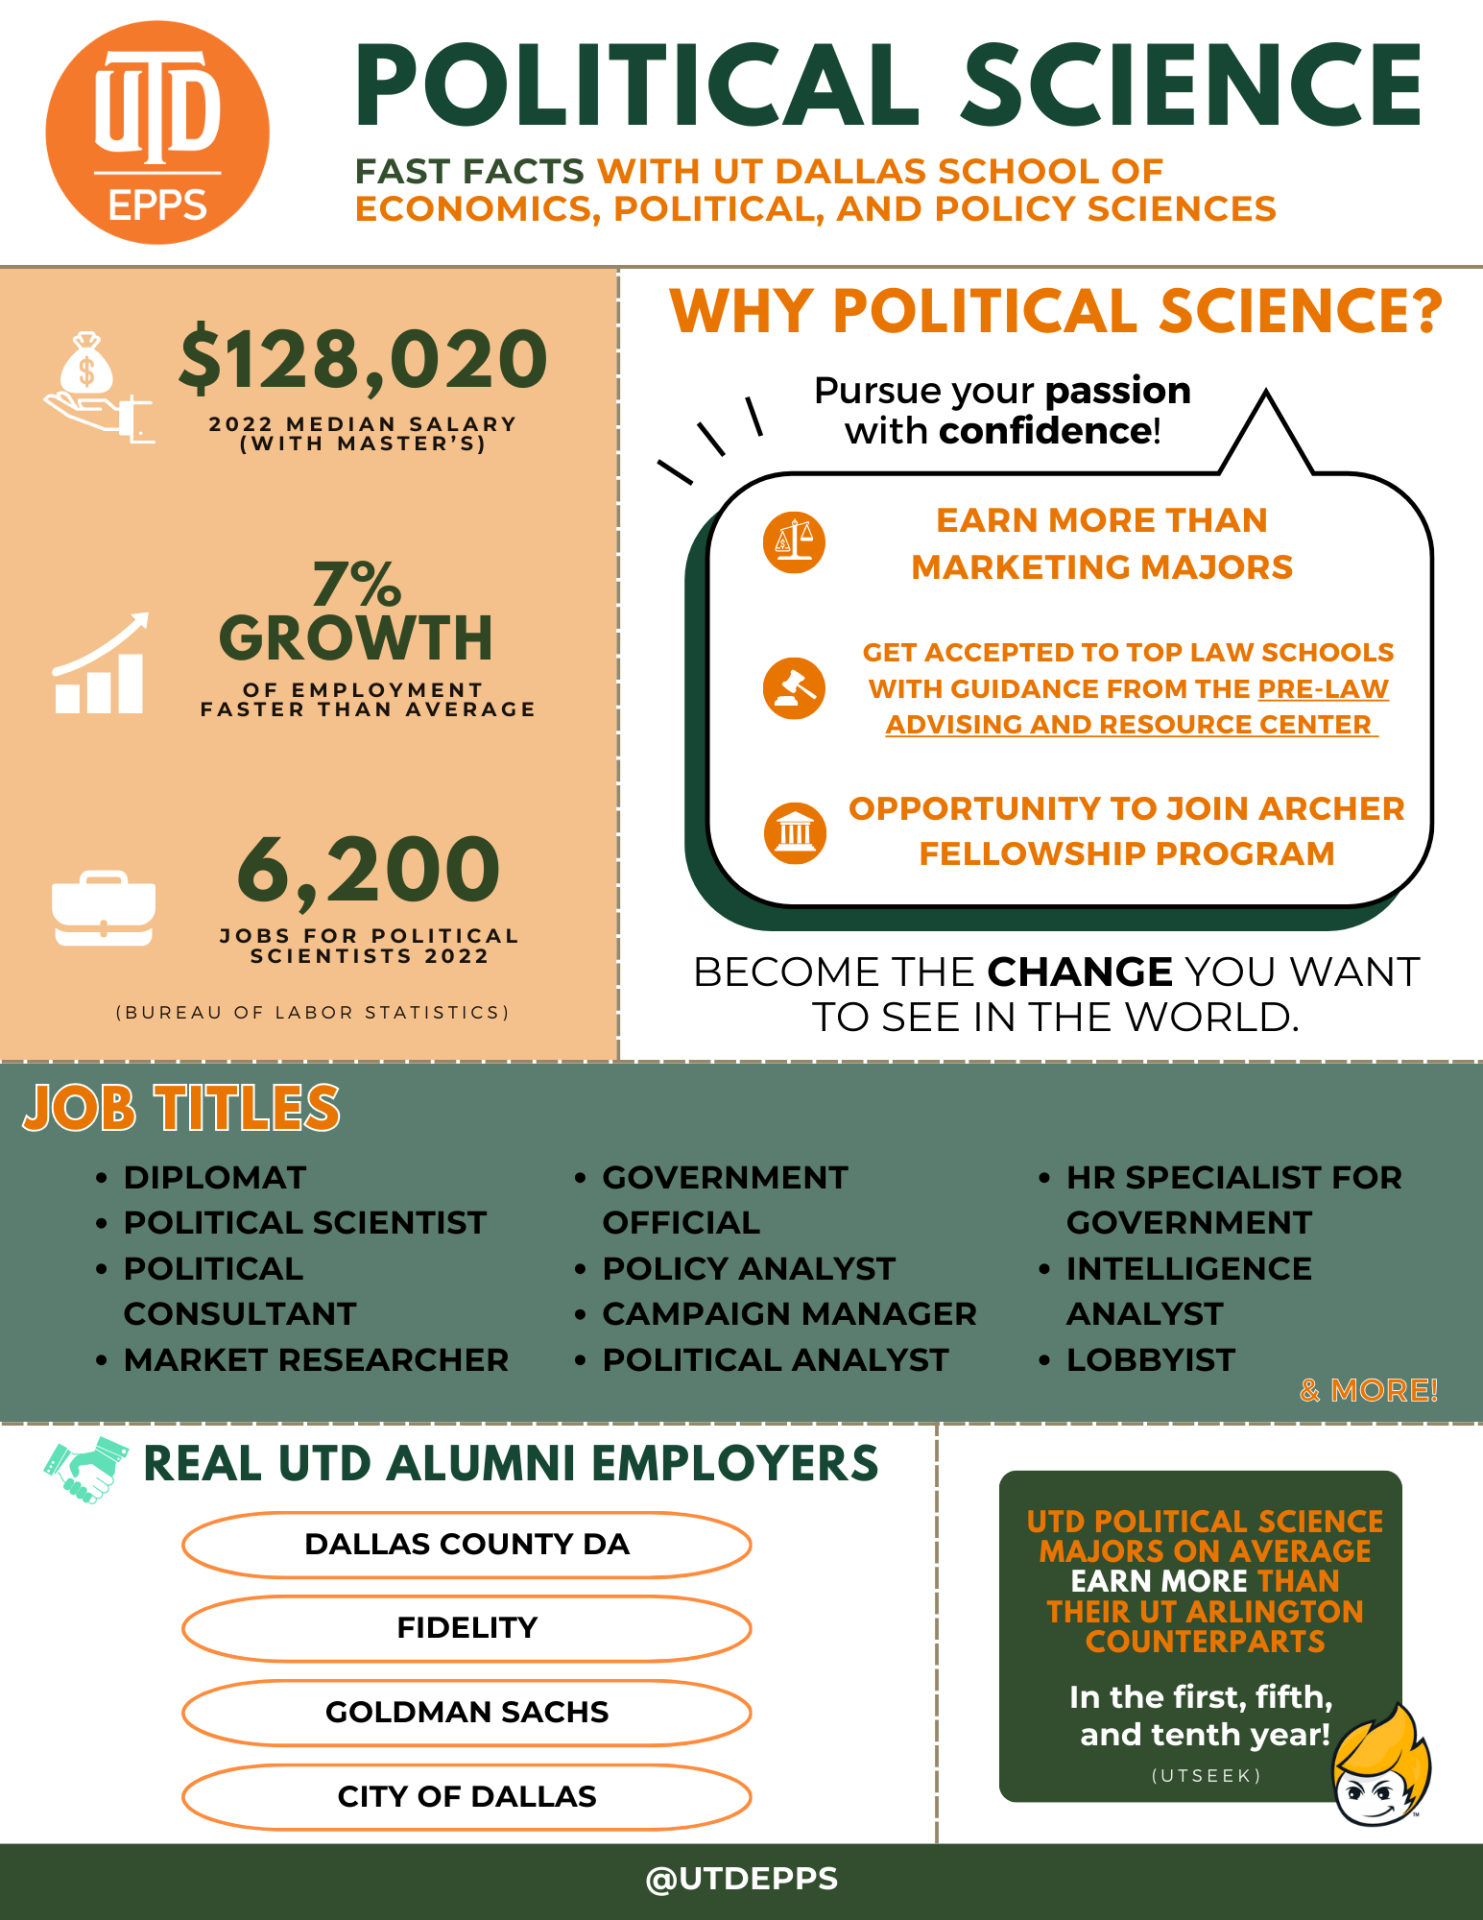 Political Science
Fast Facts with Ut Dallas school of economics, political, and policy sciences.

8,020 is the 2022 median salary 
(with master’s). 7% Growth of employment which is Faster than average. 6,200 Jobs for POLITICAL SCIENTISTS in 2022. Data is from the Bureau of Labor Statistics.

WHY political science? Pursue your passion with confidence!
EARN MORE THAN MARKETING MAJORS. GET ACCEPTED TO TOP LAW SCHOOLS WITH GUIDANCE FROM THE PRE-LAW ADVISING AND RESOURCE CENTER. OPPORTUNITY TO JOIN ARCHER FELLOWSHIP PROGRAM. BECOME THE CHANGE YOU WANT TO SEE IN THE WORLD.

Job titles include:
DIPLOMAT 
POLITICAL SCIENTIST
POLITICAL CONSULTANT
MARKET RESEARCHER
GOVERNMENT OFFICIAL
POLICY ANALYST
CAMPAIGN MANAGER
POLITICAL ANALYST
HR SPECIALIST FOR GOVERNMENT
INTELLIGENCE ANALYST
LOBBYIST
& MORE!

UTD POLITICAL SCIENCE MAJORS on average earn more than their UT Arlington counterparts In the first, fifth, and tenth year! Data is from UTSEEK.

Real UTD Alumni Employers include:
DALLAS COUNTY DA
FIDELITY
GOLDMAN SACHS
CITY OF DALLAS

@UTDEPPS